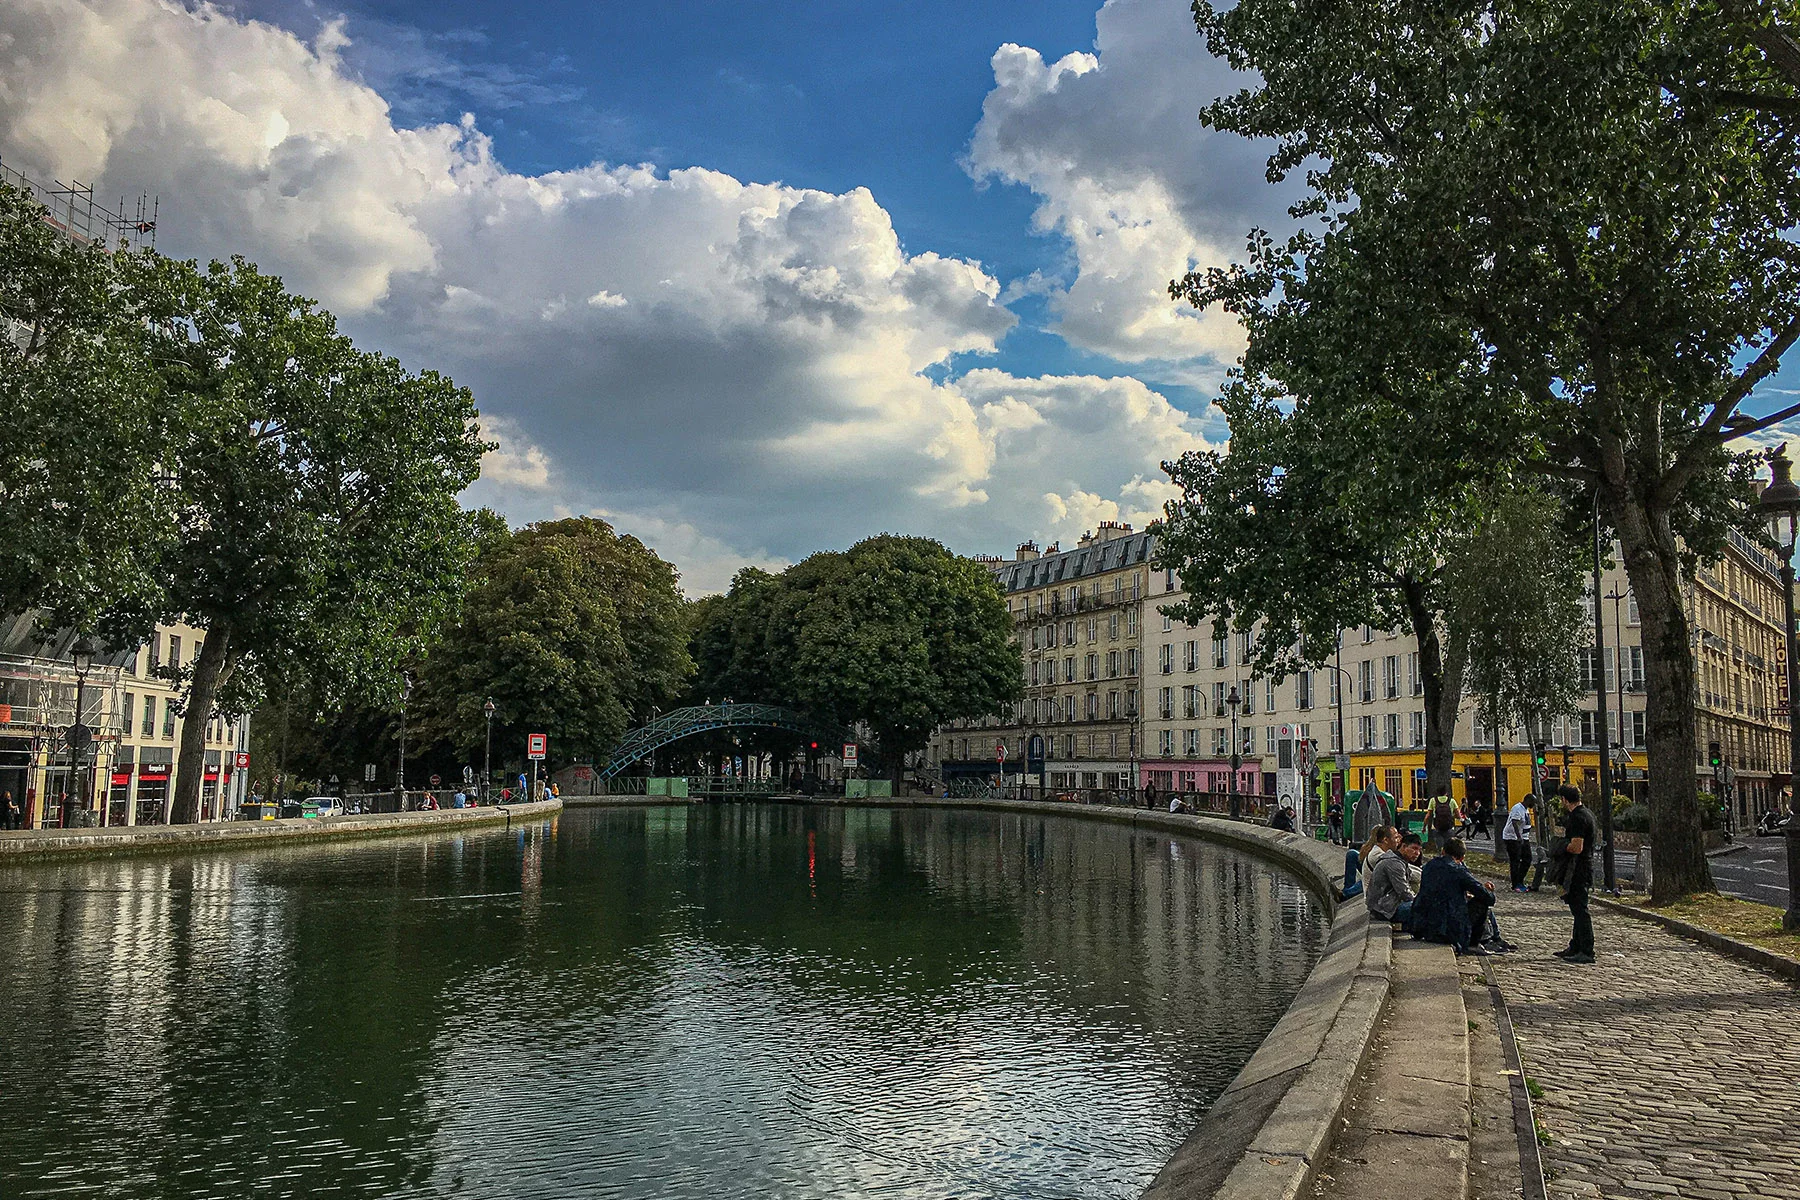 The Canal Saint Martin in the 12th arrondissement, by Vince Duque